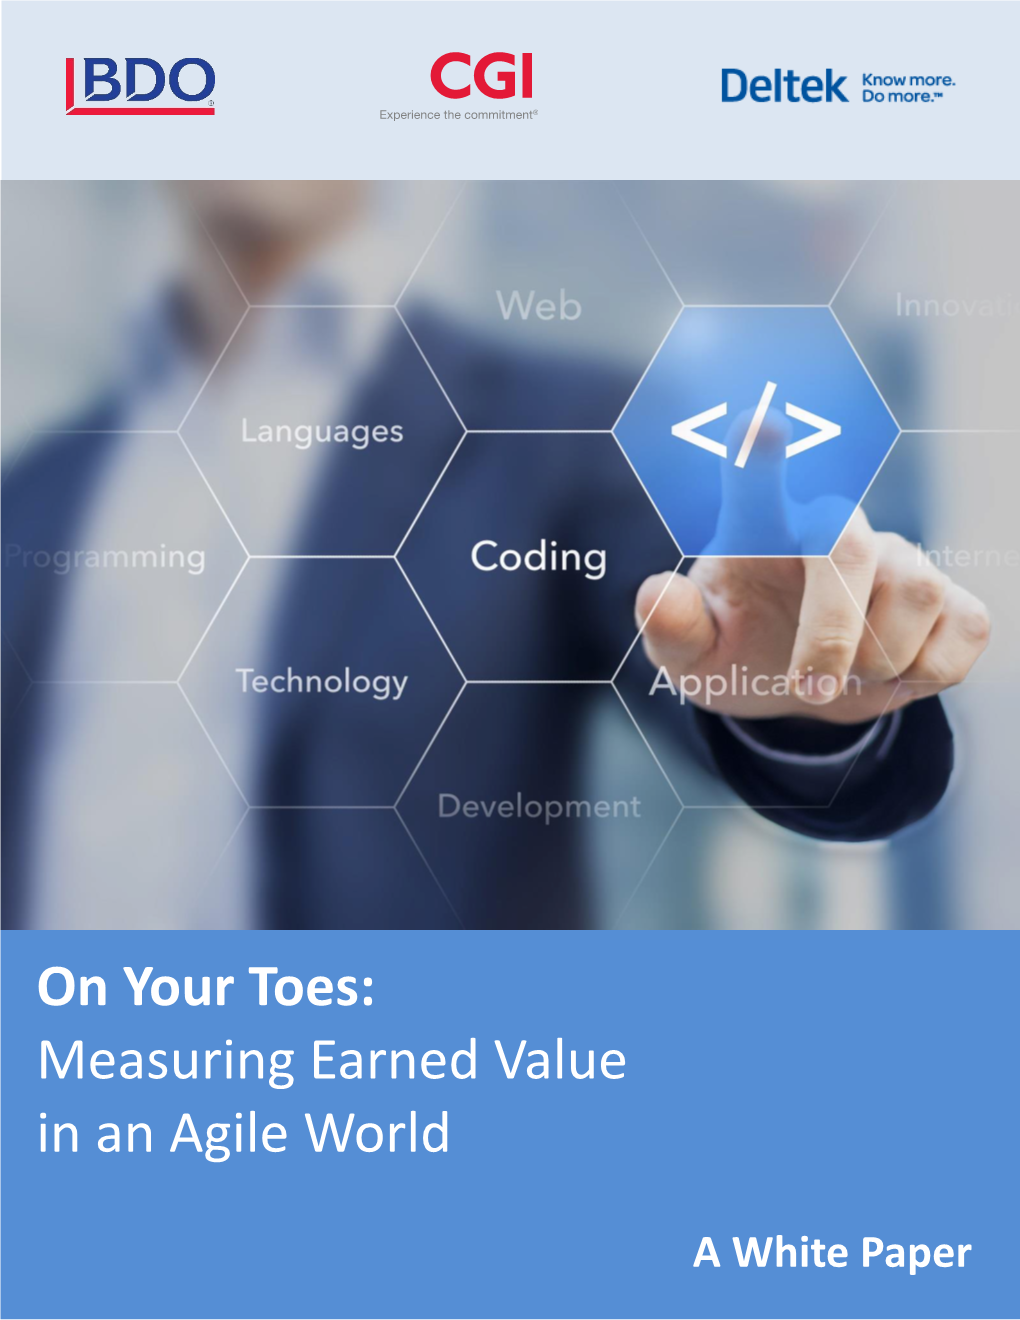 On Your Toes: Measuring Earned Value in an Agile World